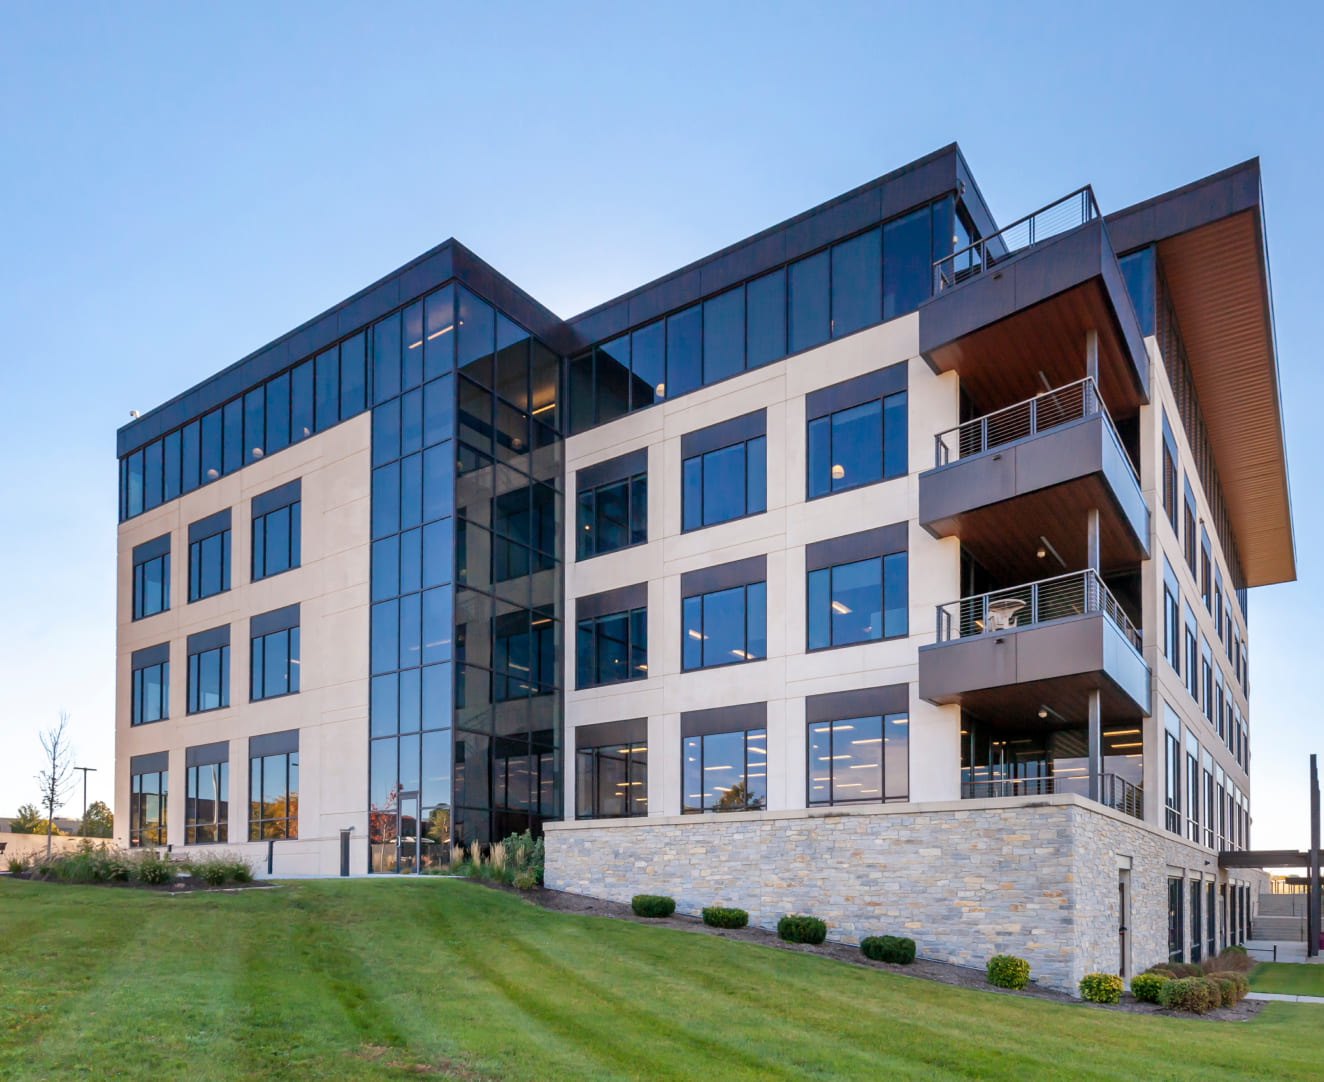 A rear view of the exterior and balconies of the office building at 2323 Crossroads Drive in Madison, WI.